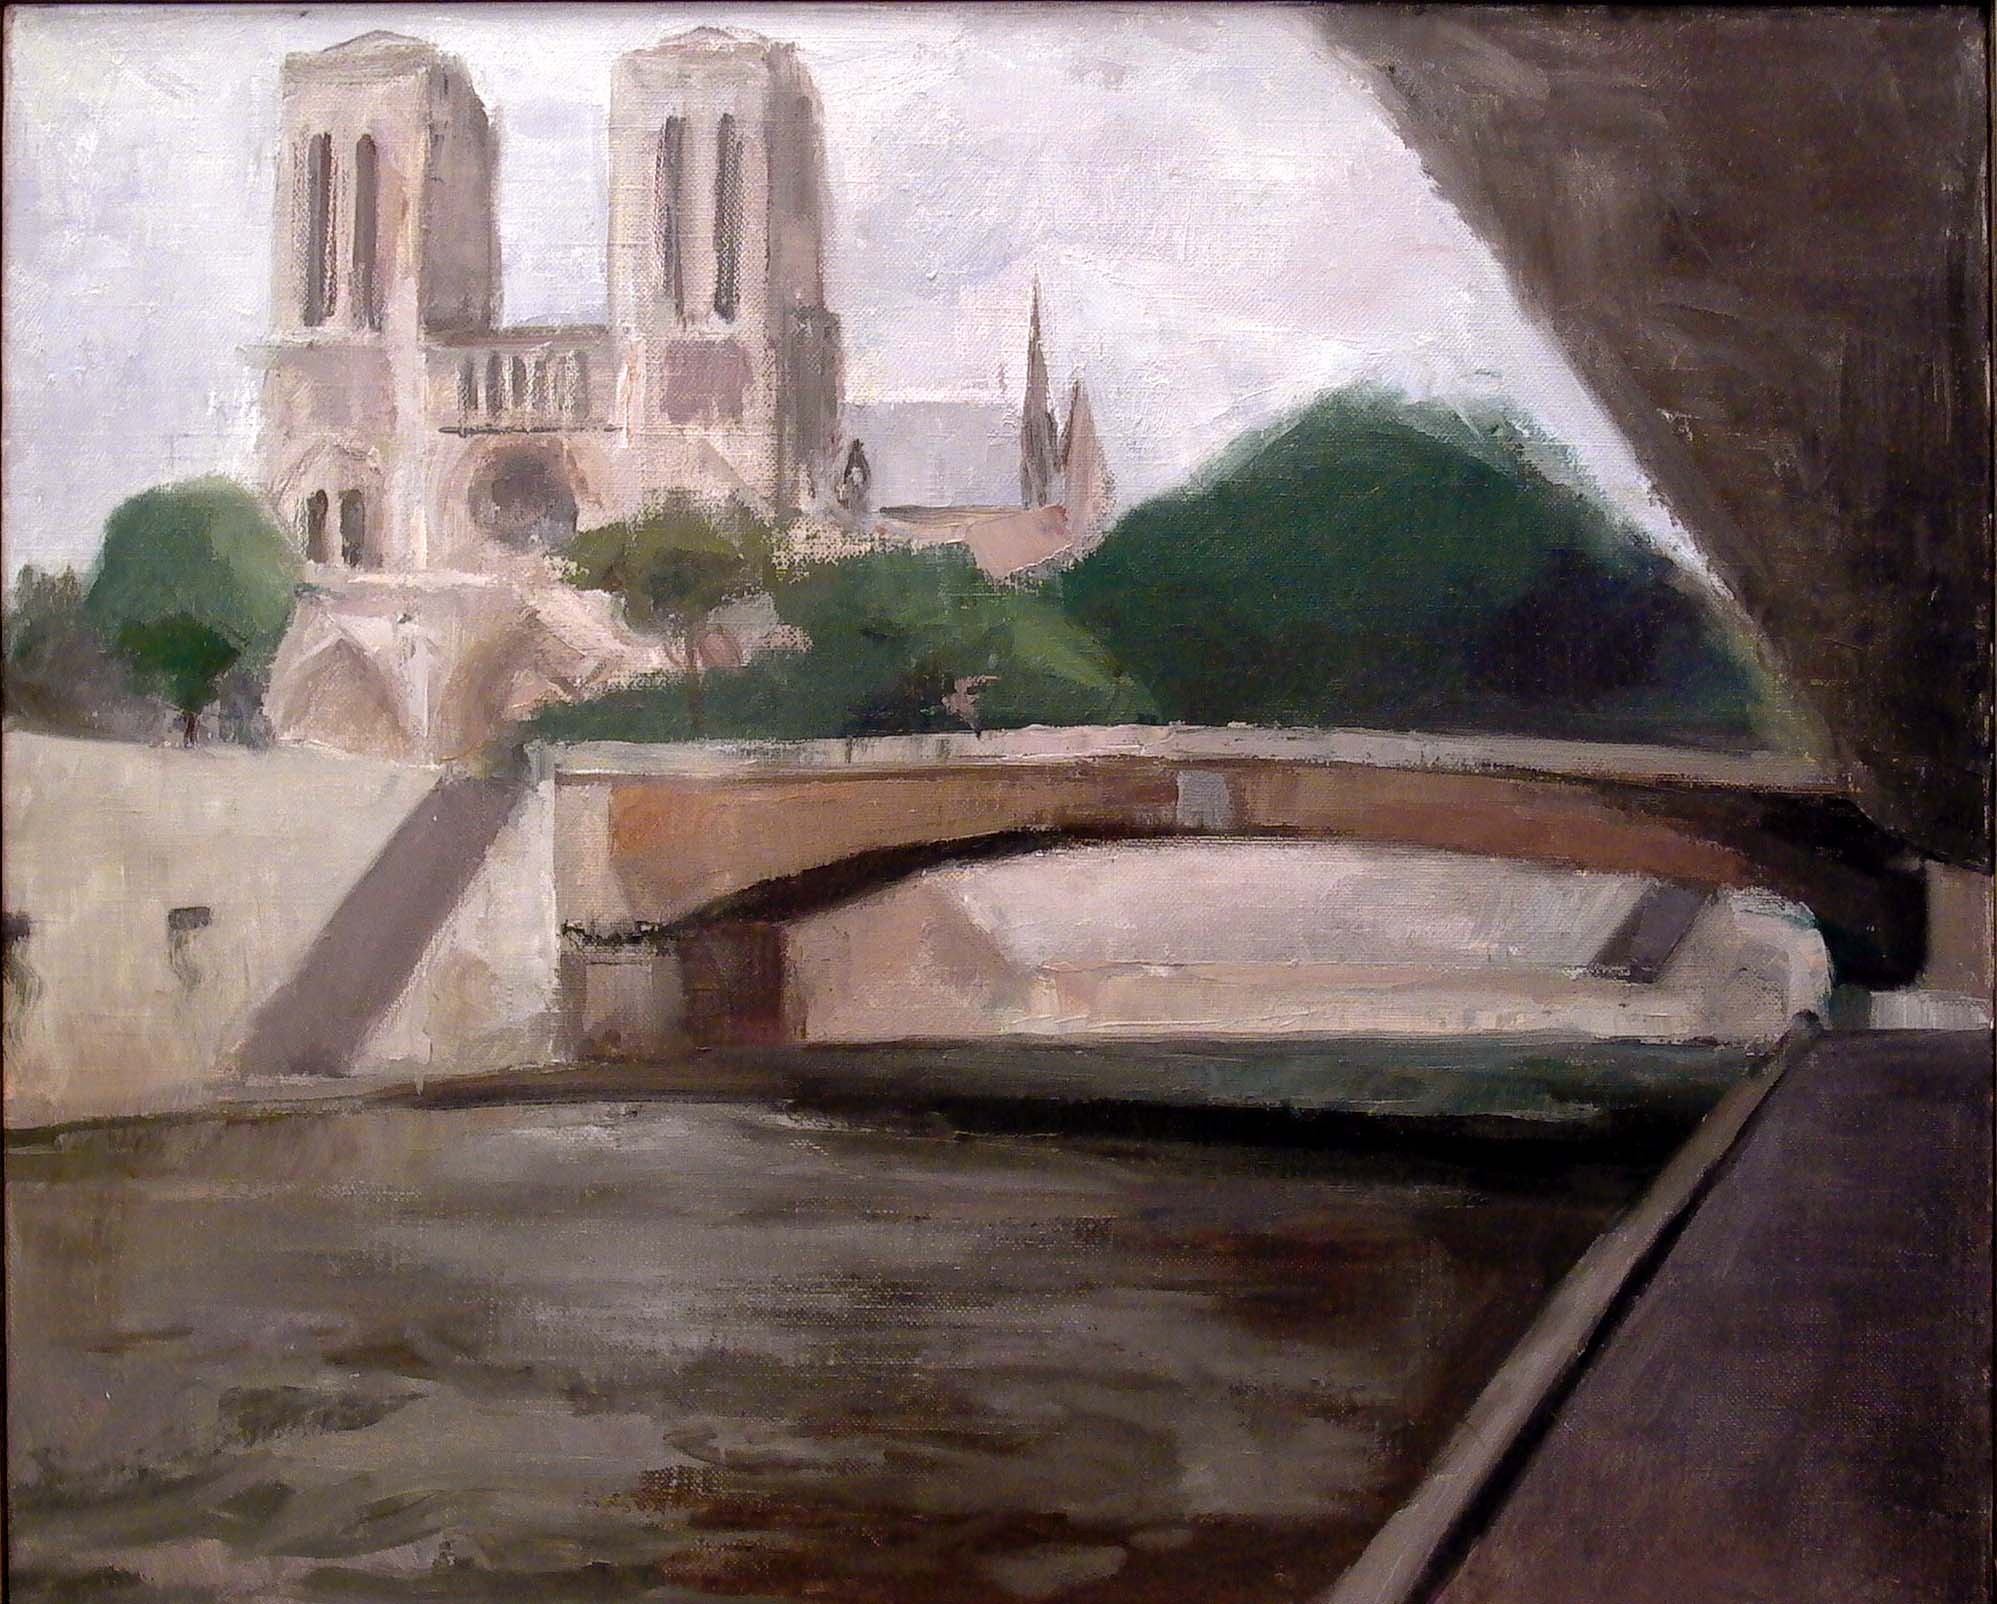 Notre Dame, 20 x 24 inches, oil on linen, 2002.